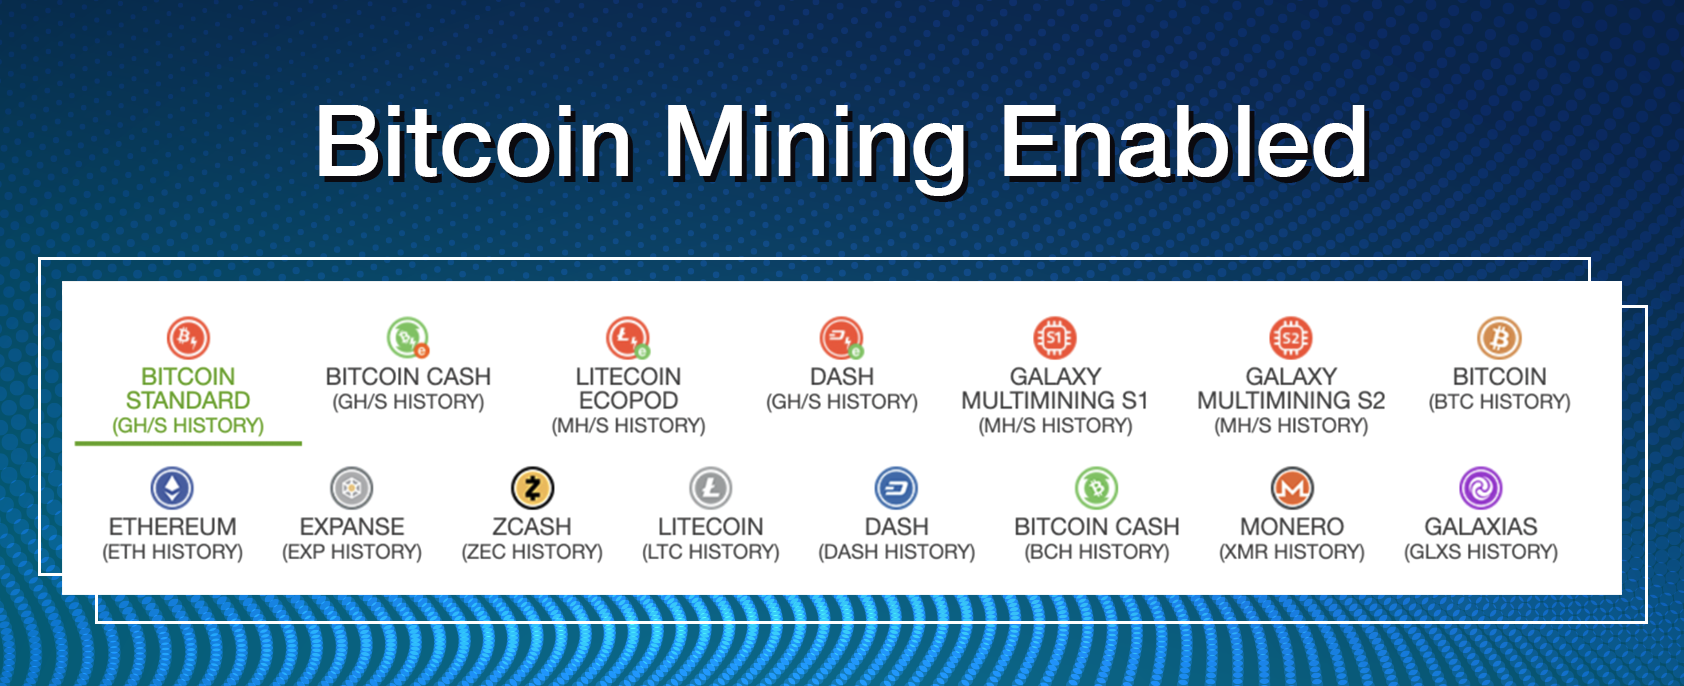 Bitcoin Mining Enabled